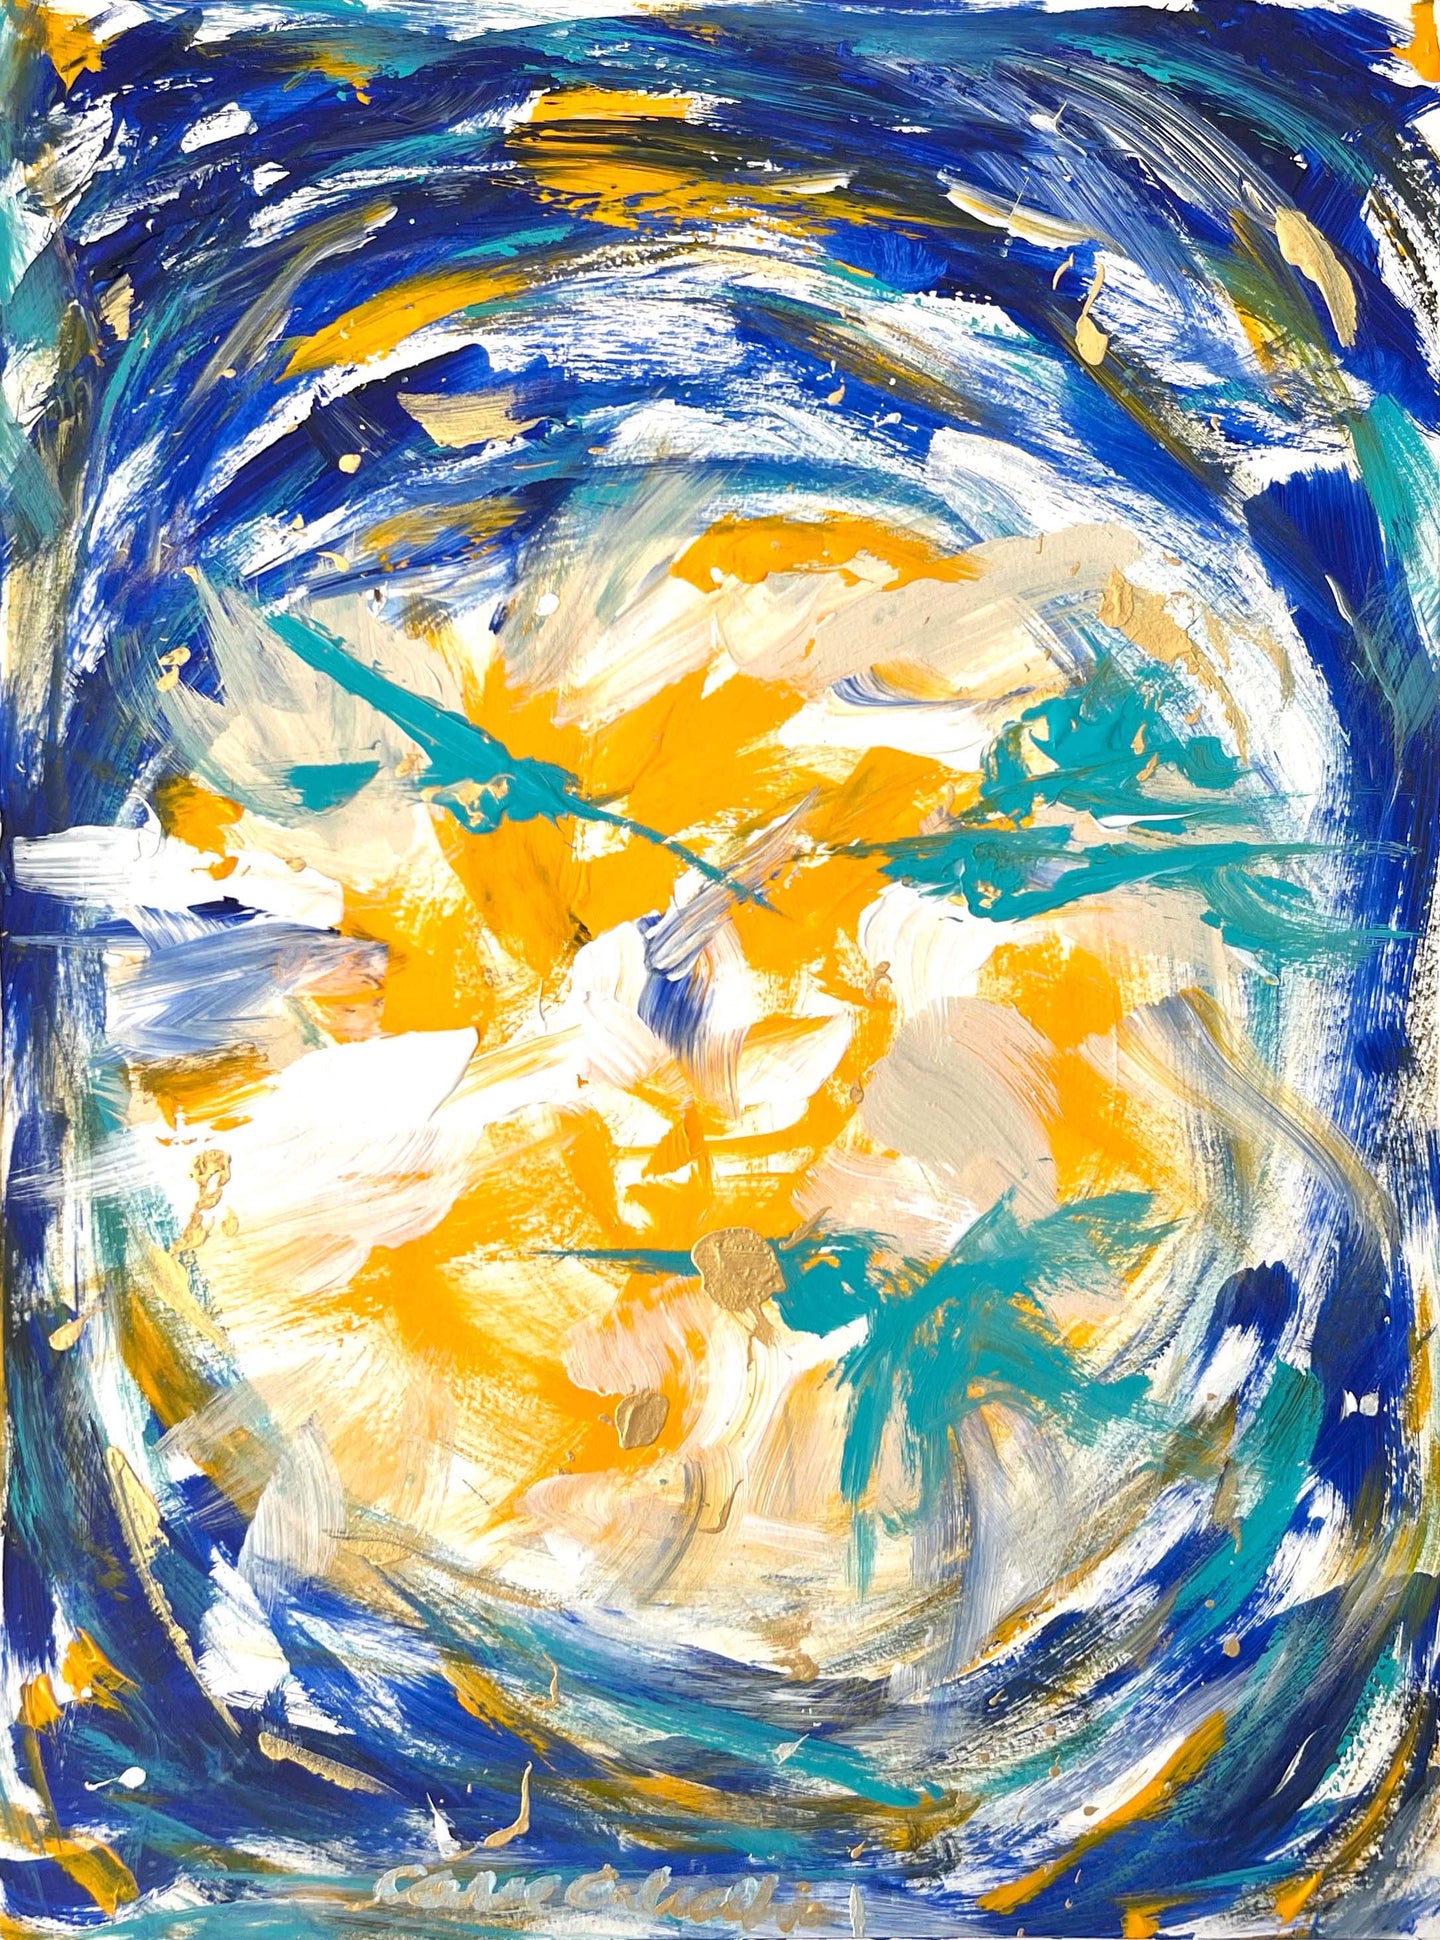 Carol Calicchio’s Blue and Yellow Abstract Painting for the Ritz Carlton South Beach, Hummingbird World, 2022, Oil painting on paper, 16 x 12 inches, for sale at Manolis Projects